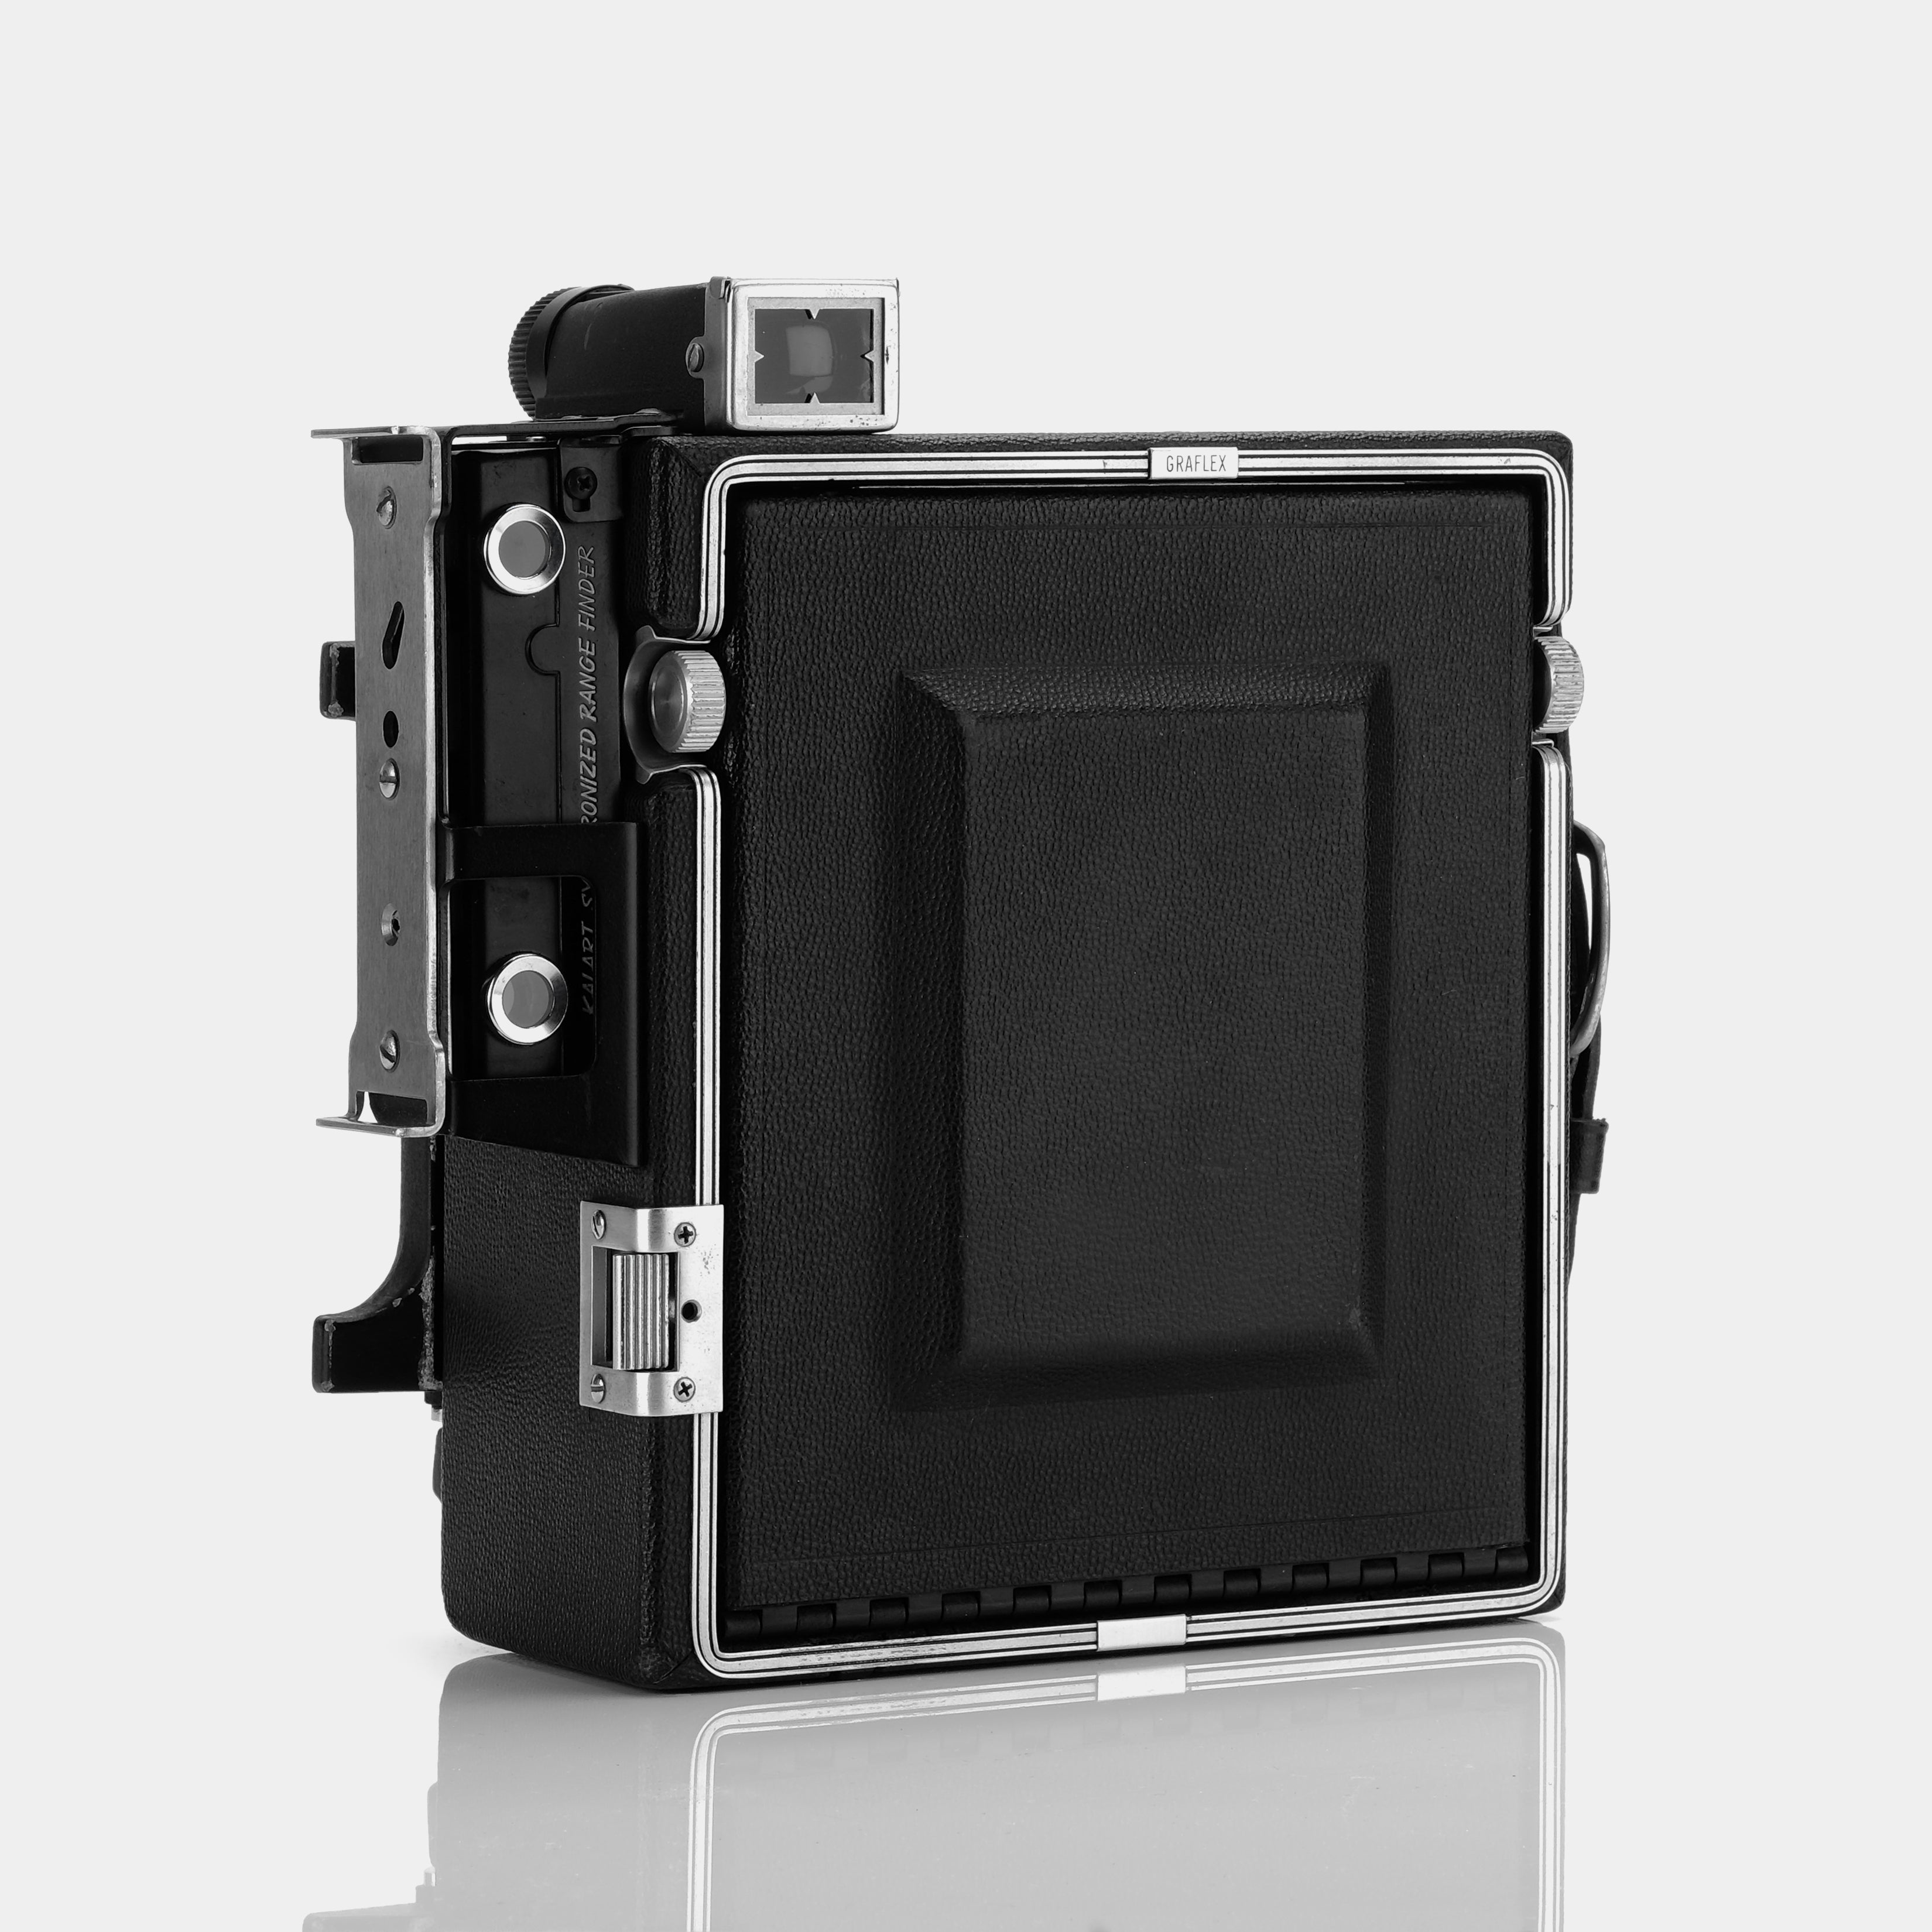 Graflex Pacemaker Crown Graphic 4x5 Large Format Film Camera